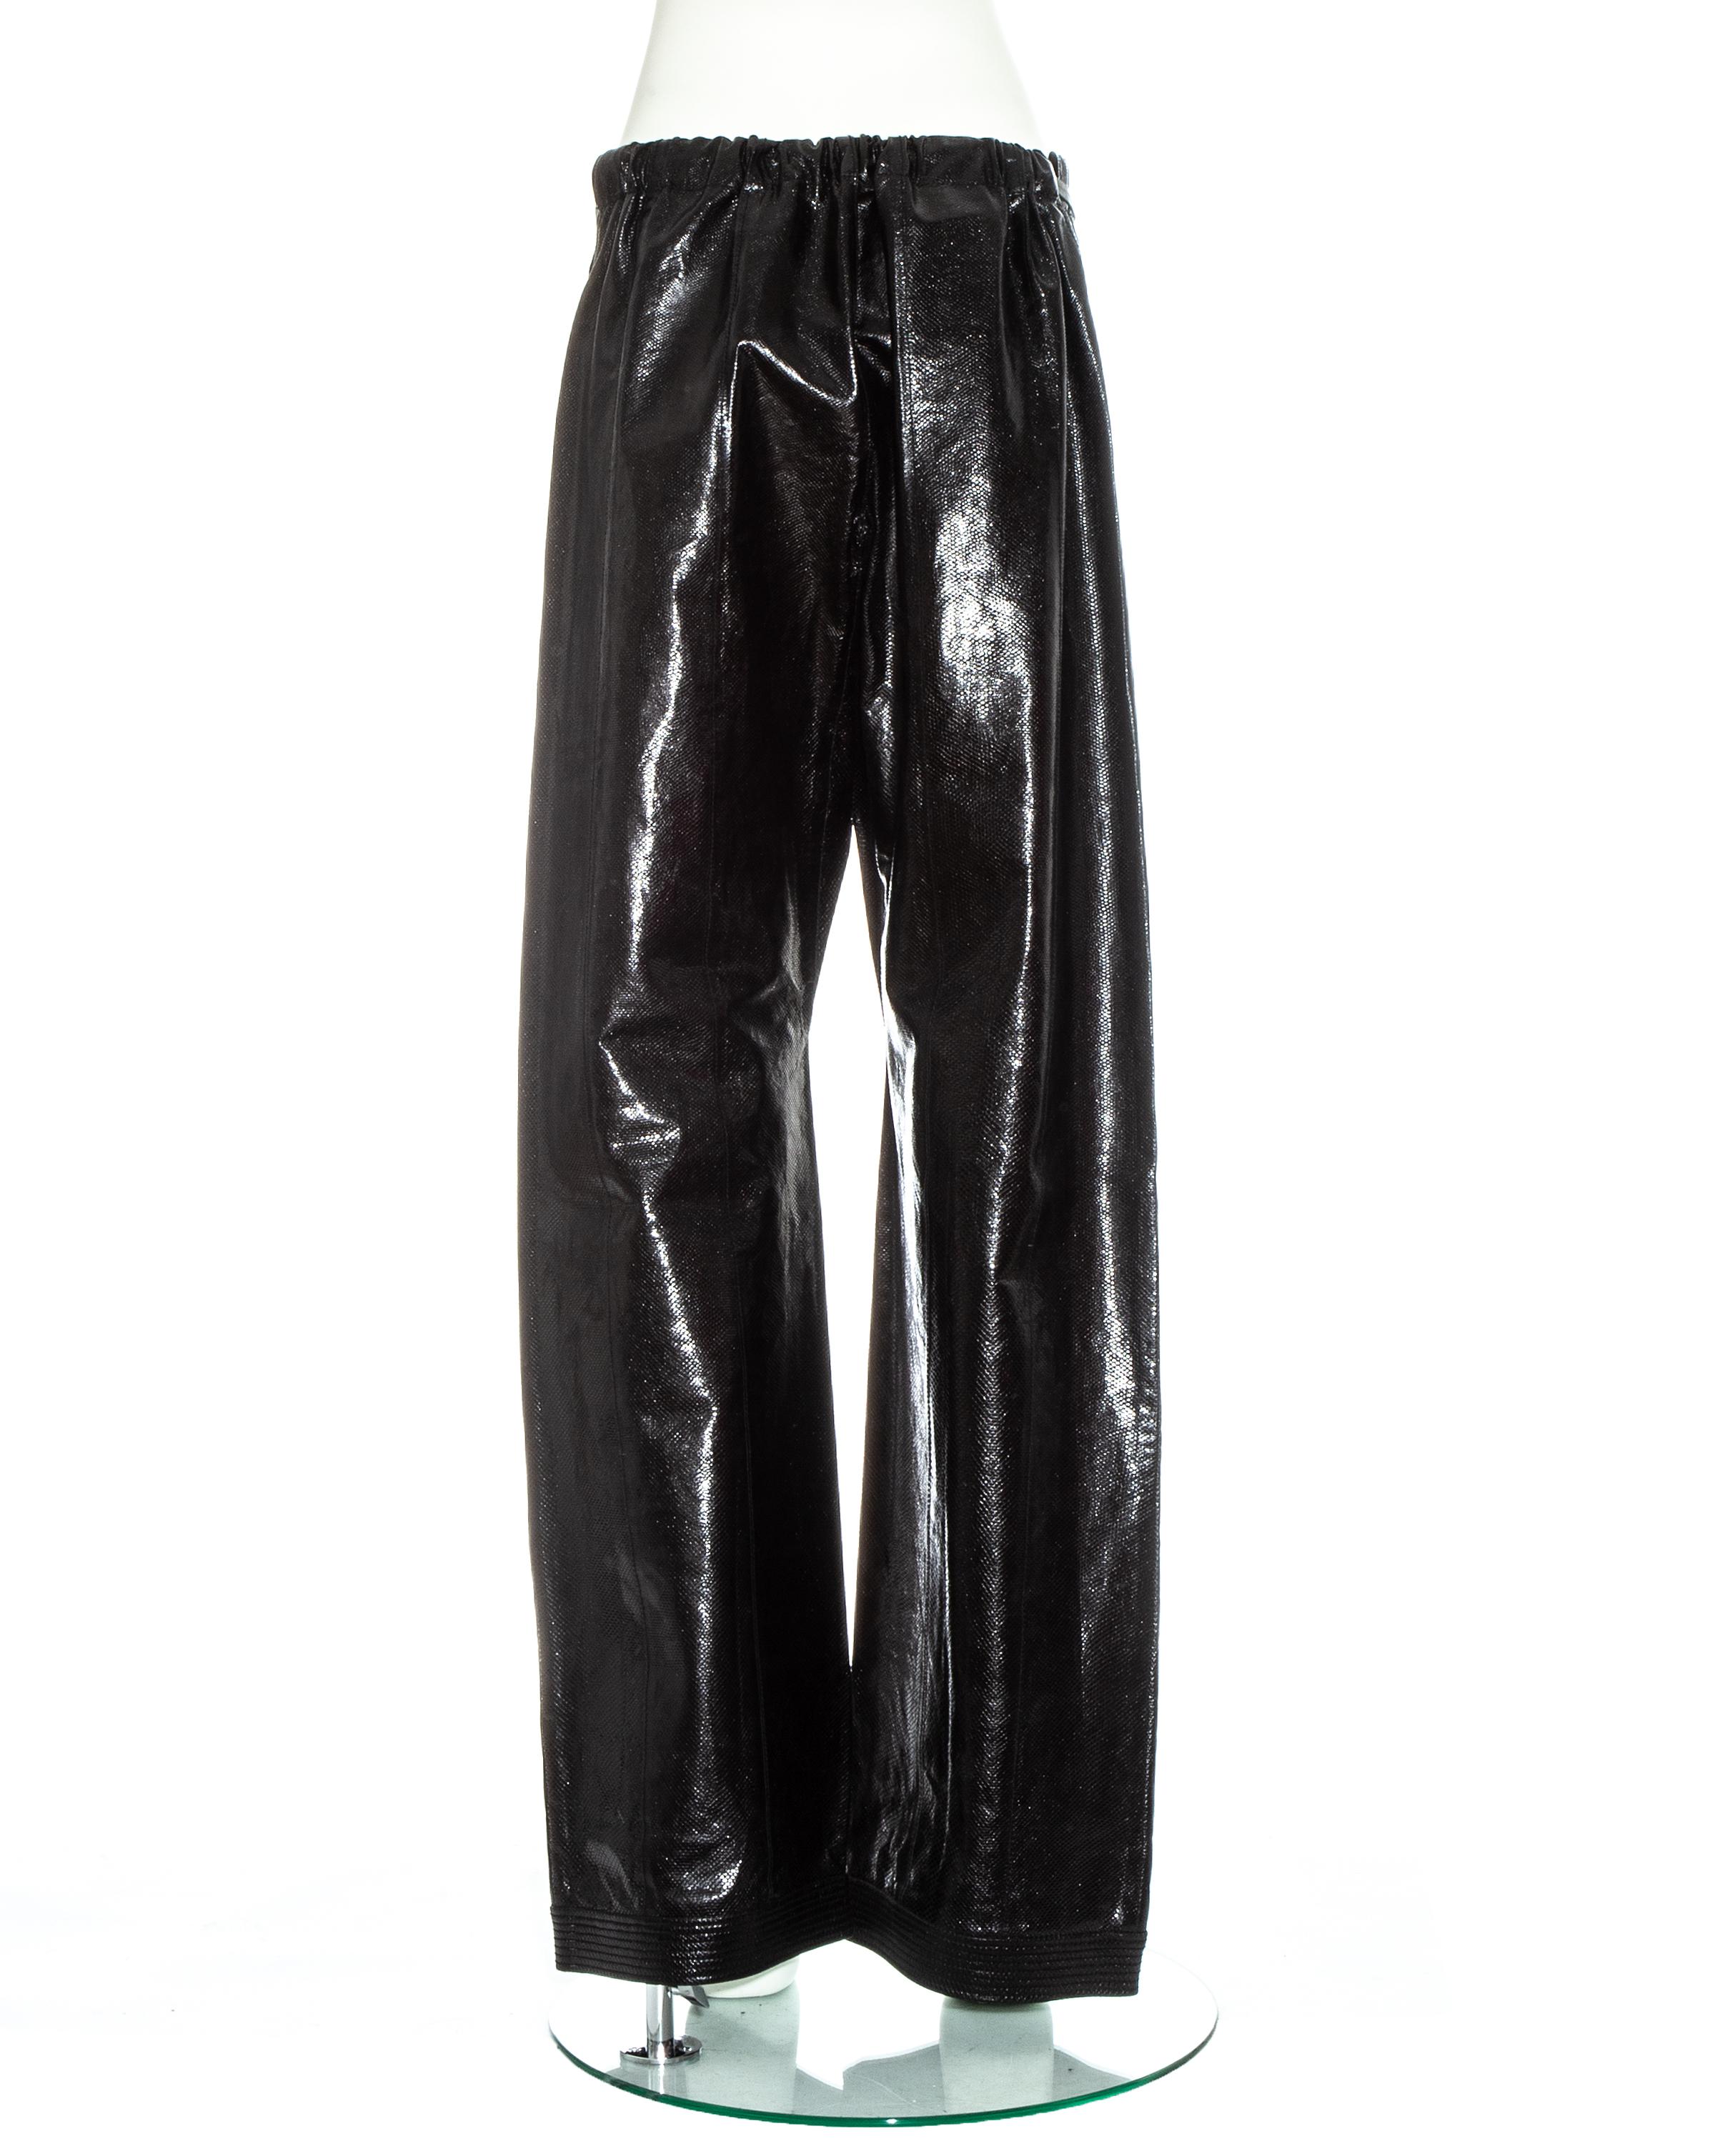 Gucci by Tom Ford unisex black lizard skin drawstring wide leg pants, ss 2001 For Sale 1